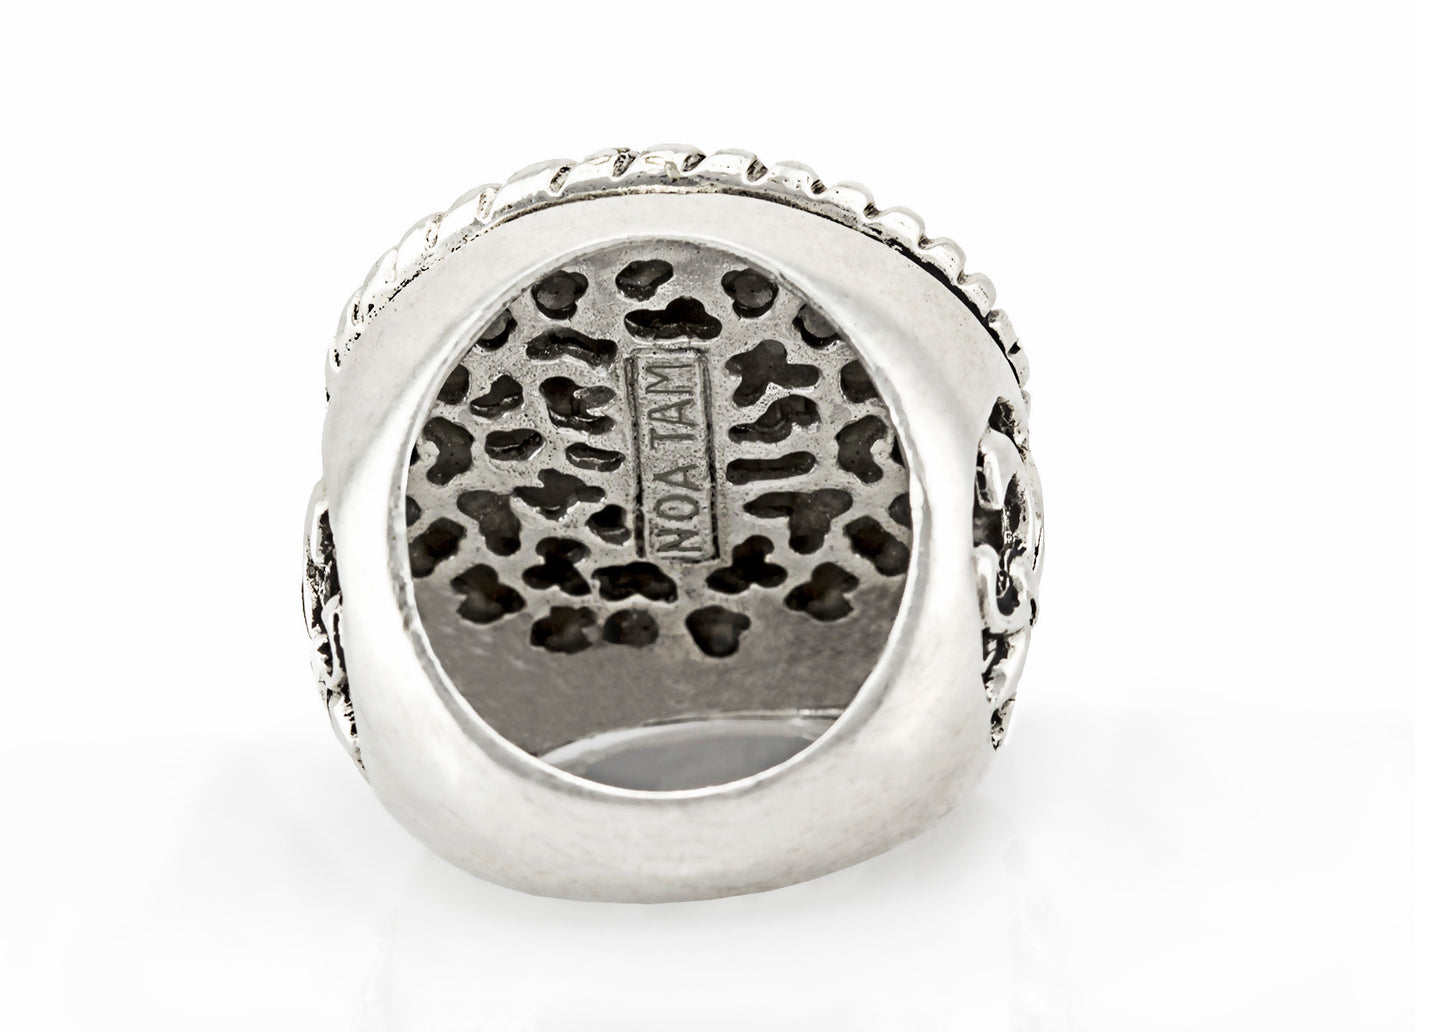 coin ring with the Shema Yisrael medallion on fleur de lis ring